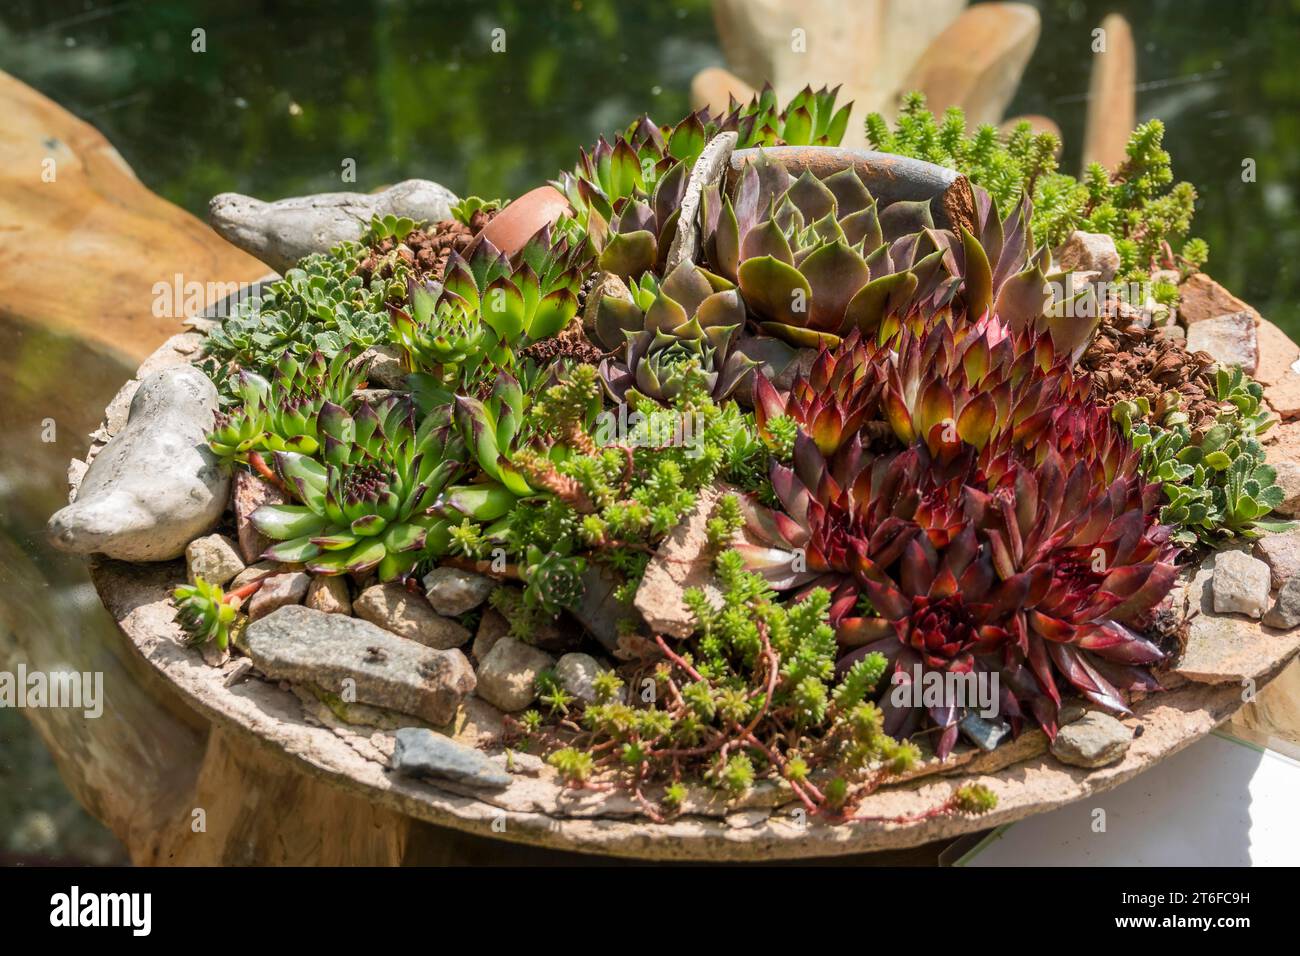 Different types of sdeum in a planter, Germany Stock Photo